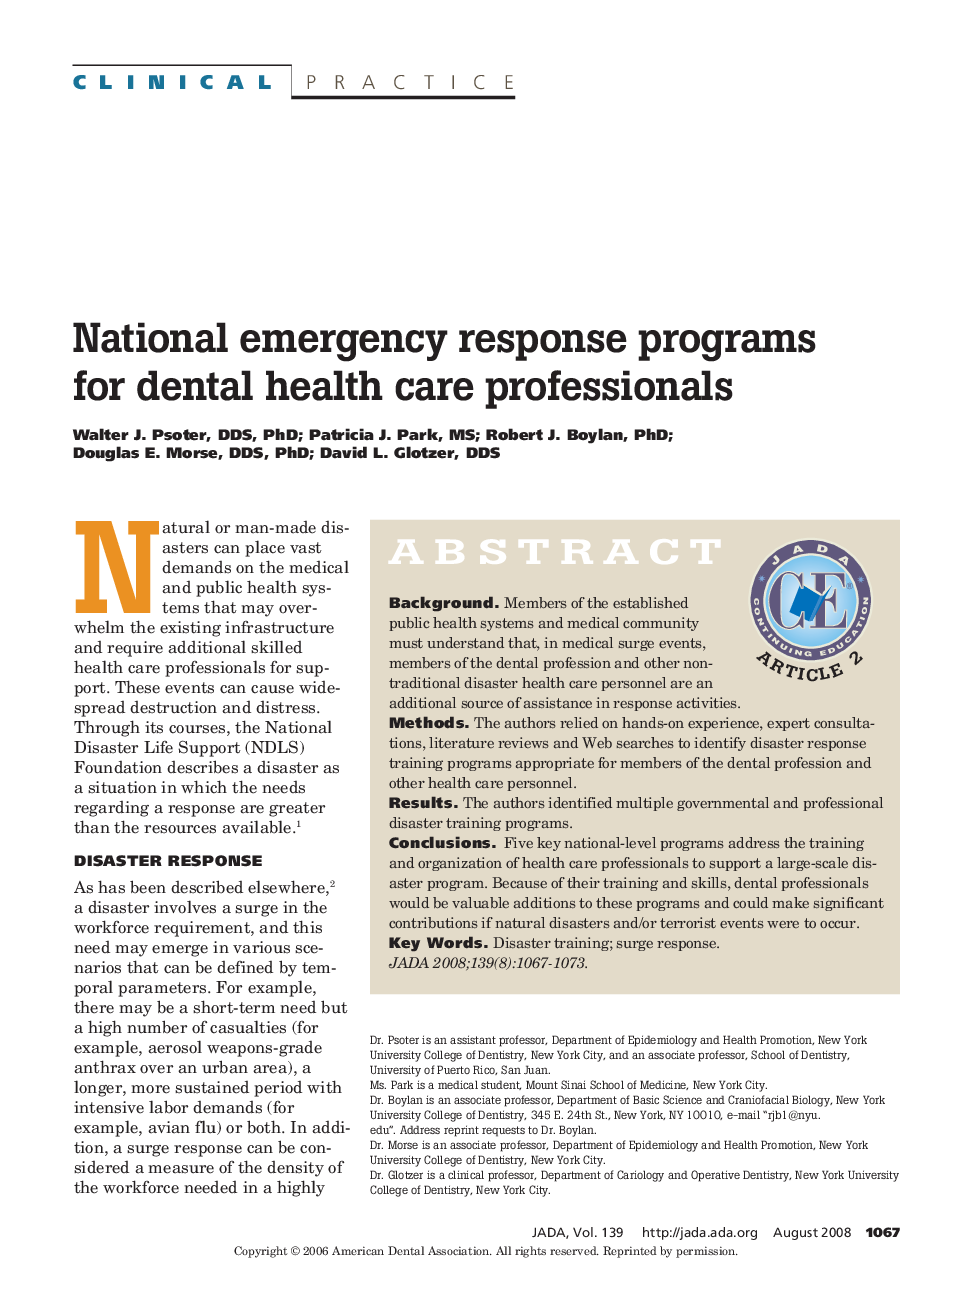 National Emergency Response Programs for Dental Health Care Professionals 